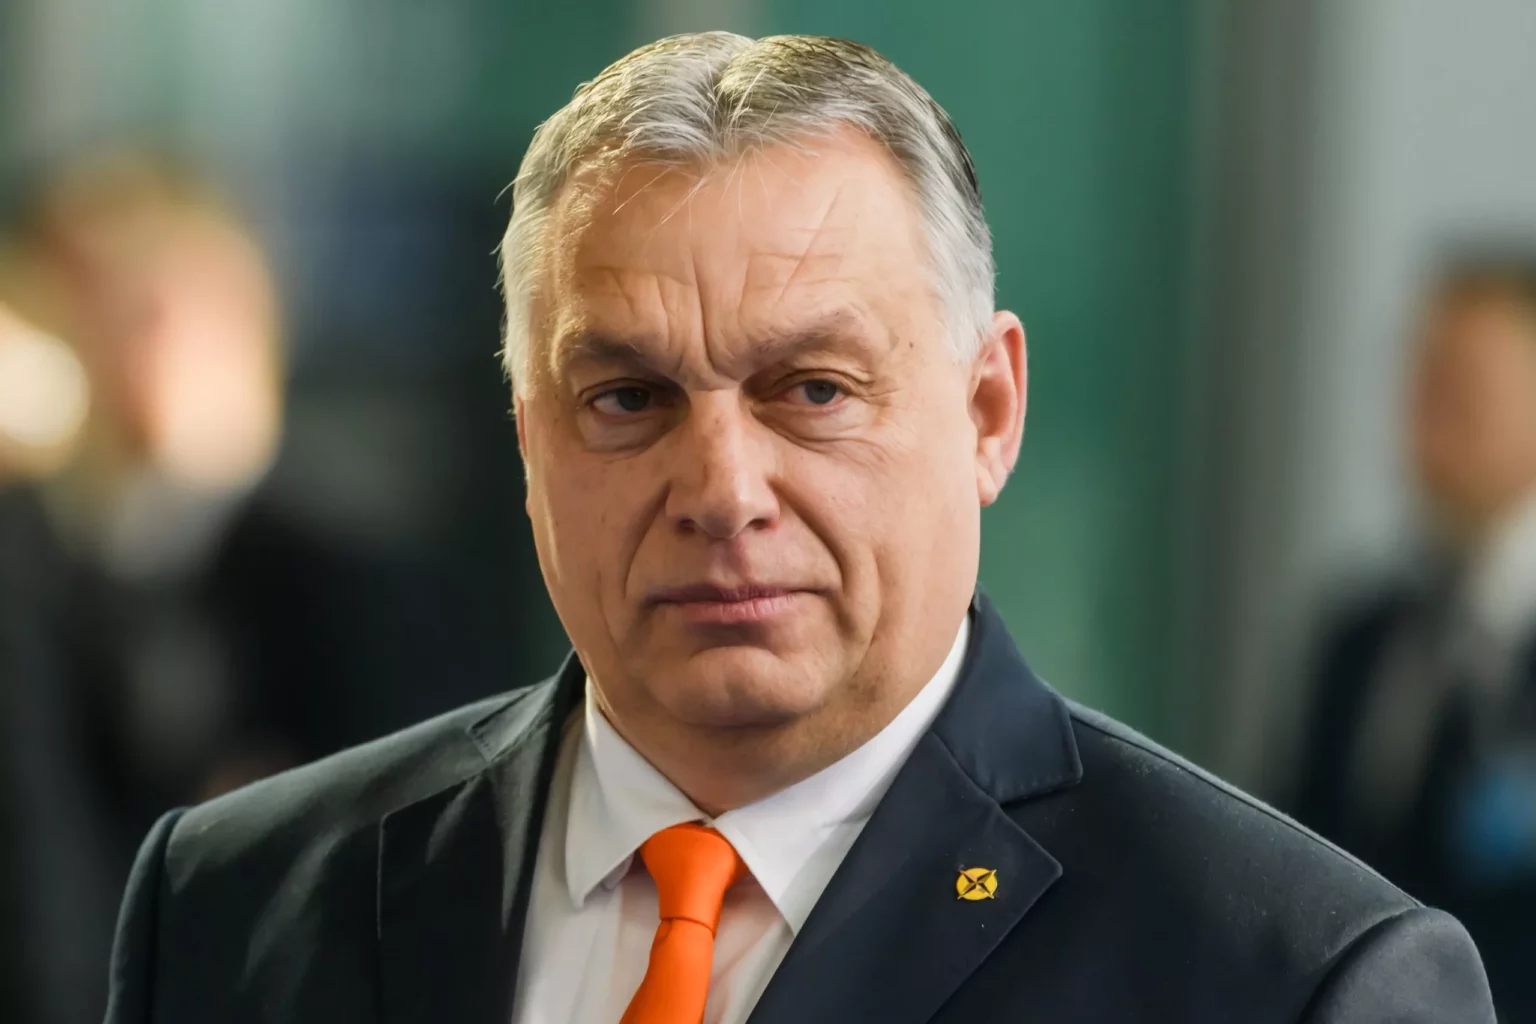 west-should-make-a-deal-with-vladimir-putin-hungarian-pm-orban